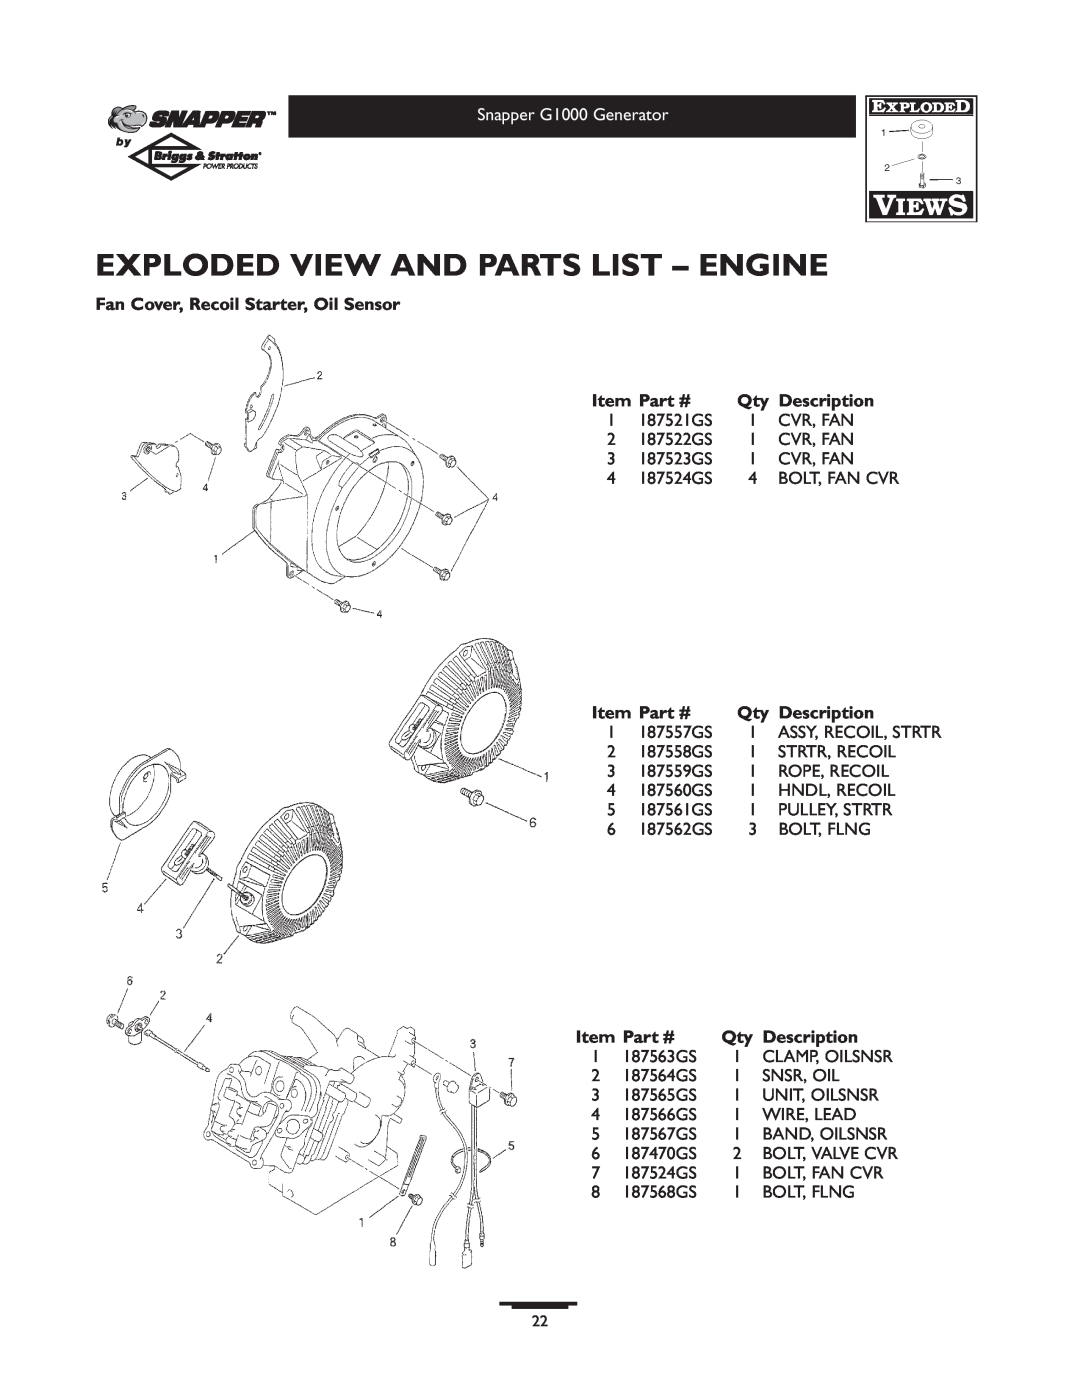 Snapper 1666-0 owner manual Exploded View And Parts List - Engine, Assy, Recoil, Strtr 